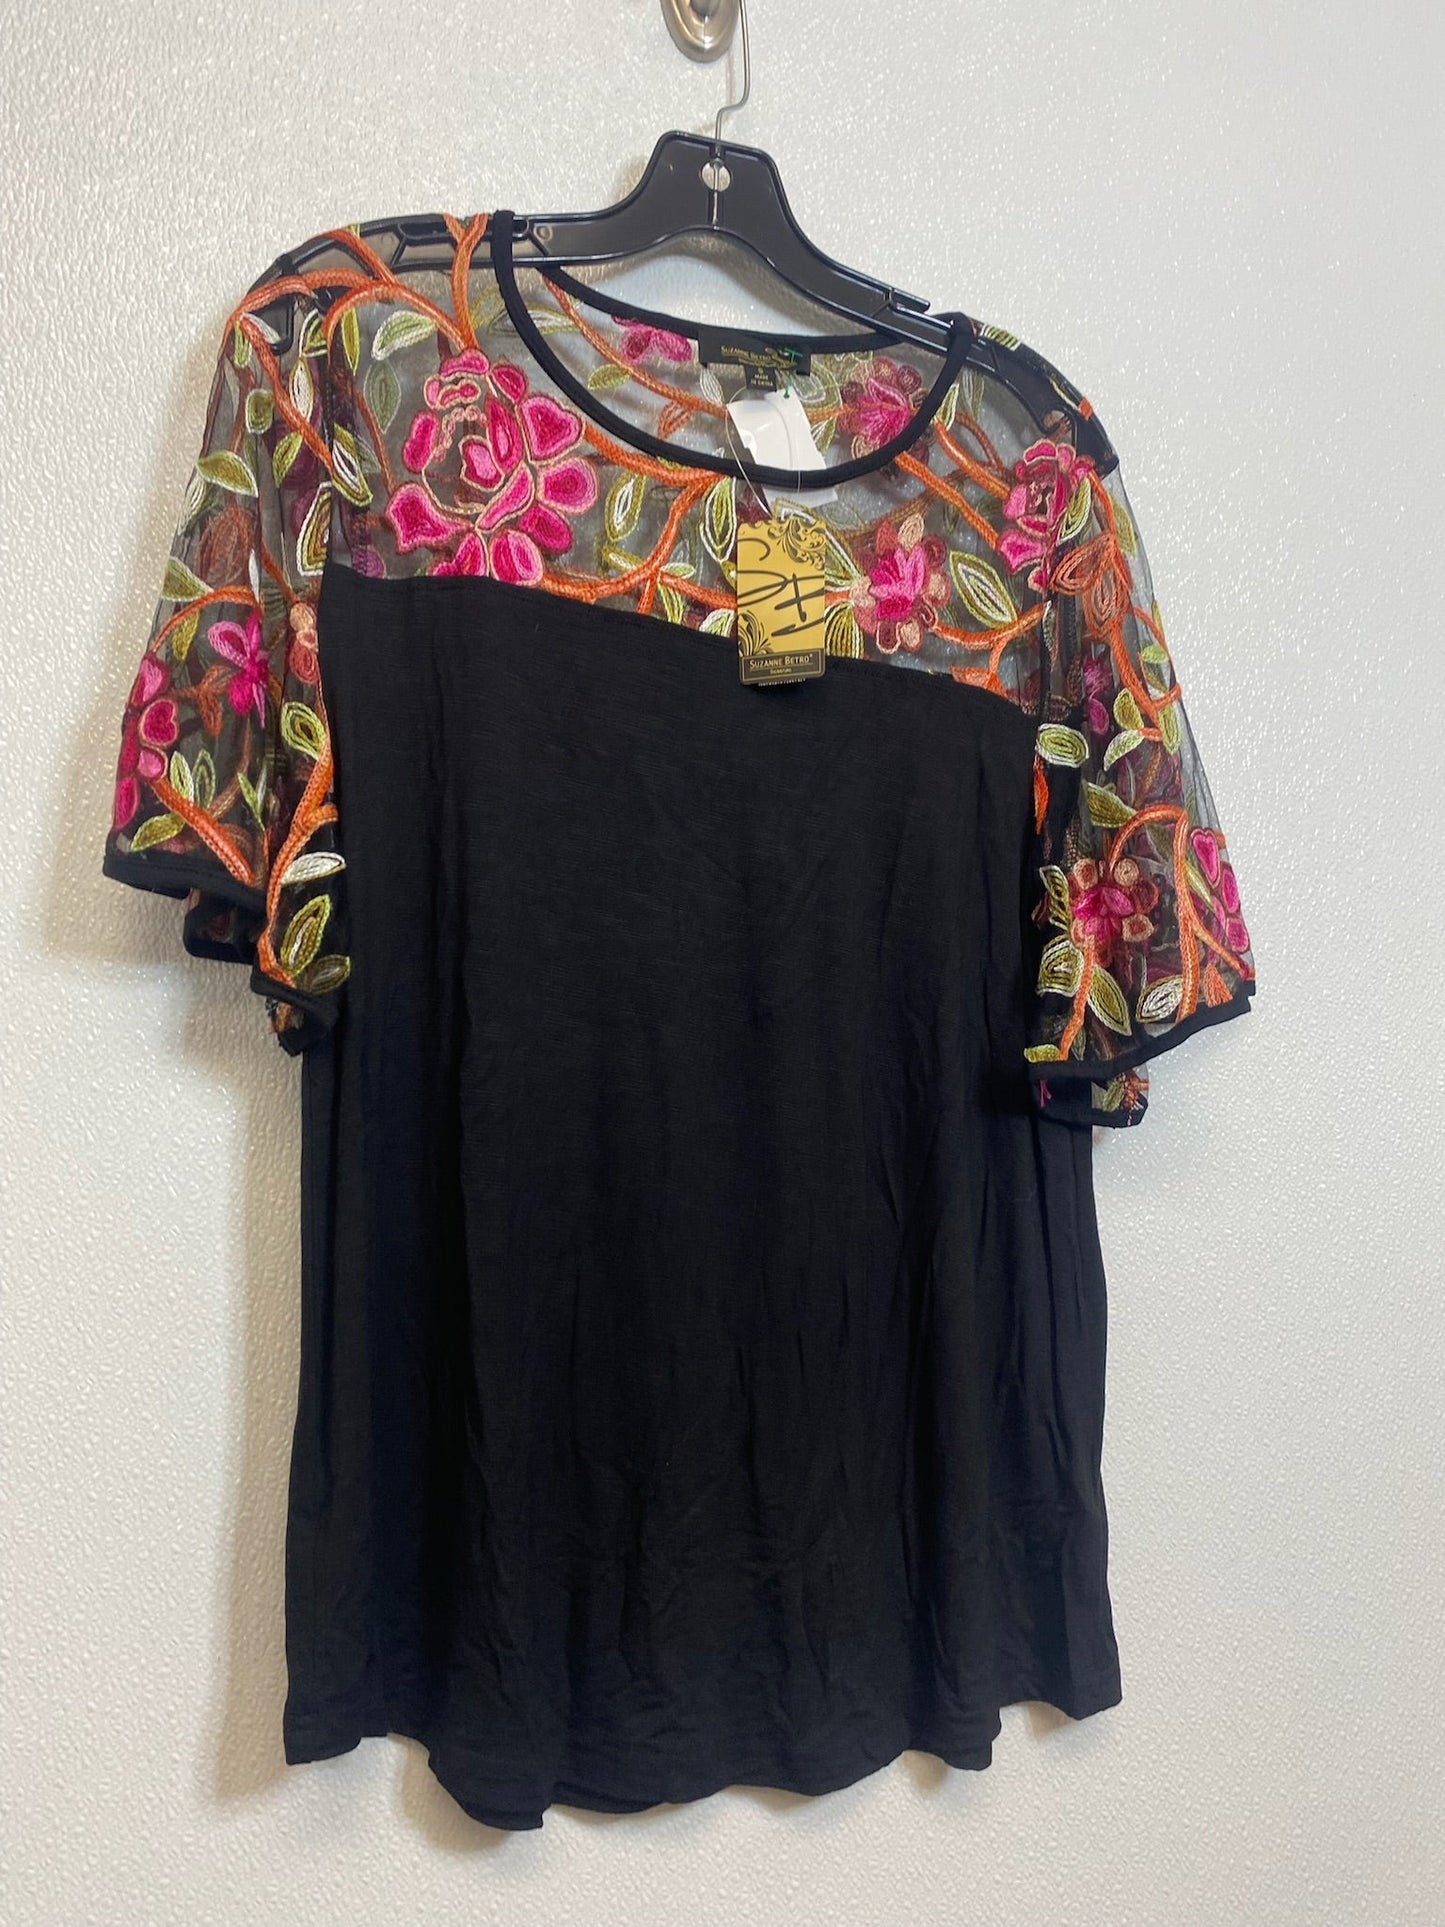 Black Top Short Sleeve Suzanne Betro, Size S